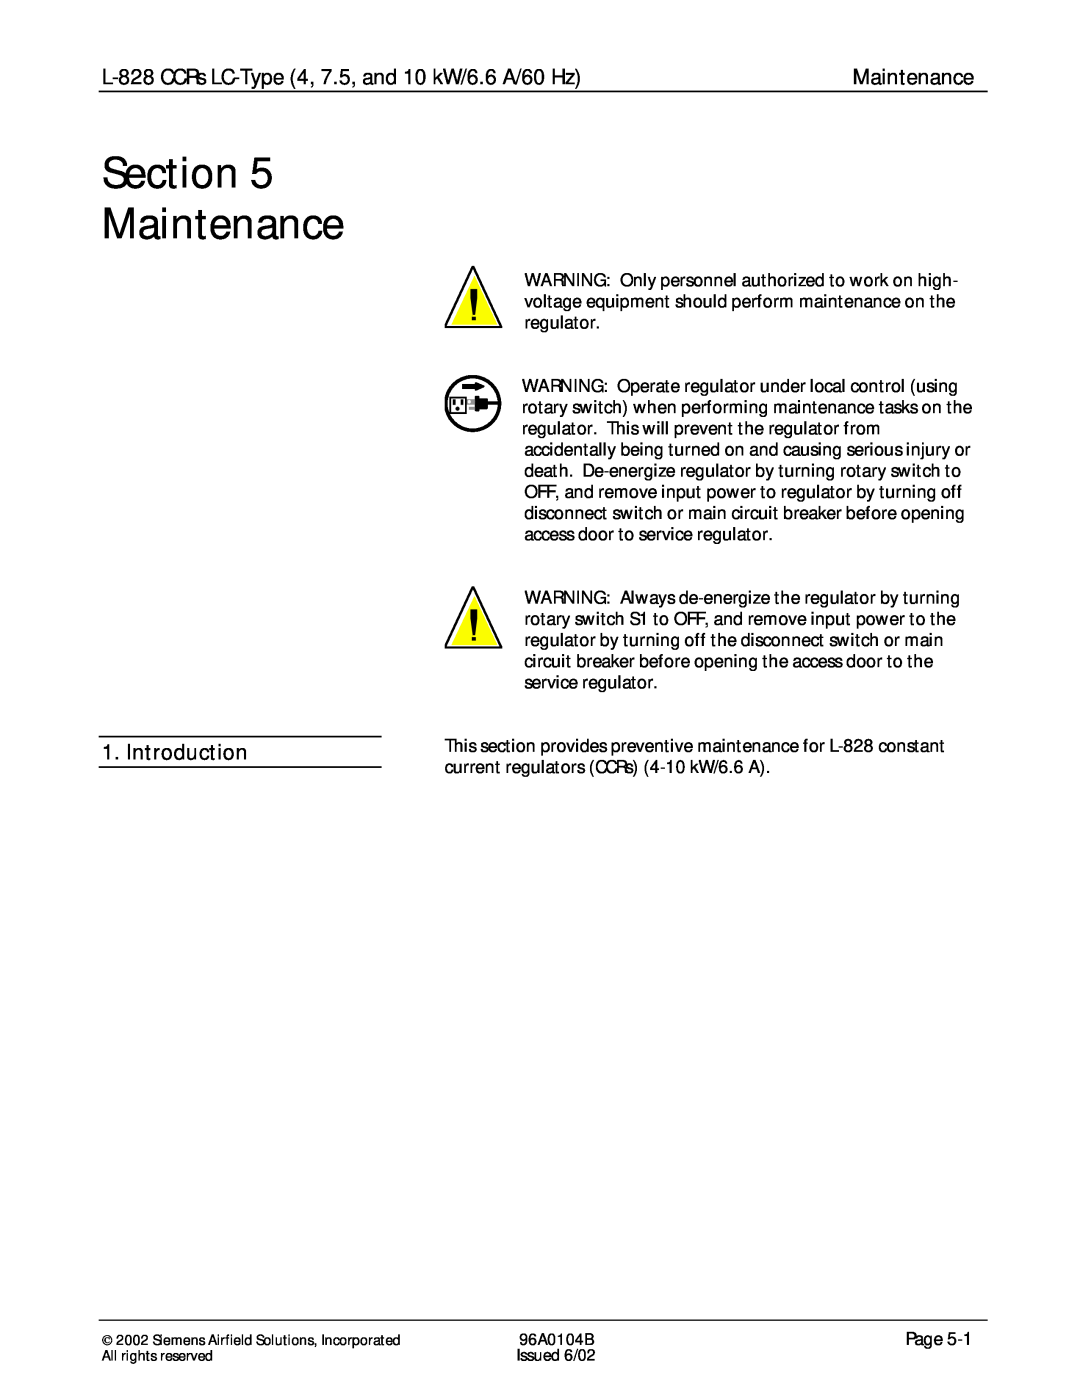 Siemens manual Maintenance, L-828CCRs LC-Type4, 7.5, and 10 kW/6.6 A/60 Hz, Introduction 